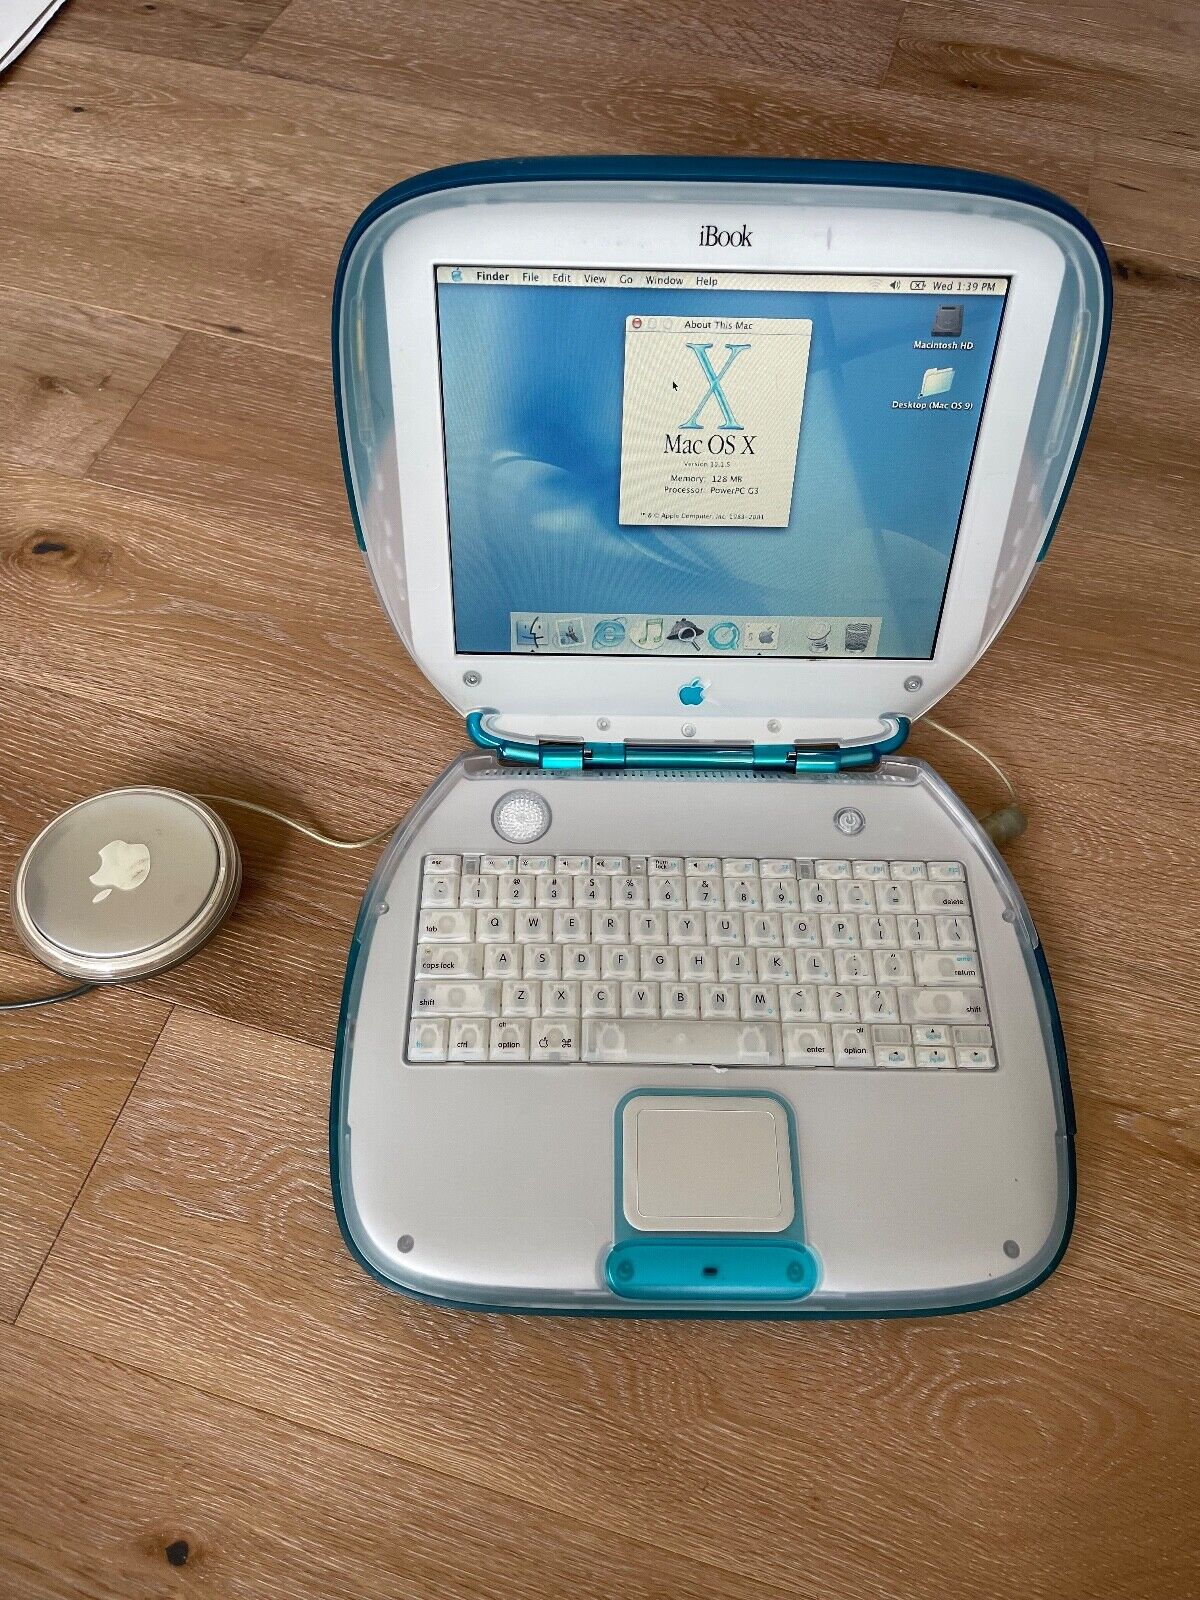 Apple iBook Clamshell G3 Blueberry M 2453